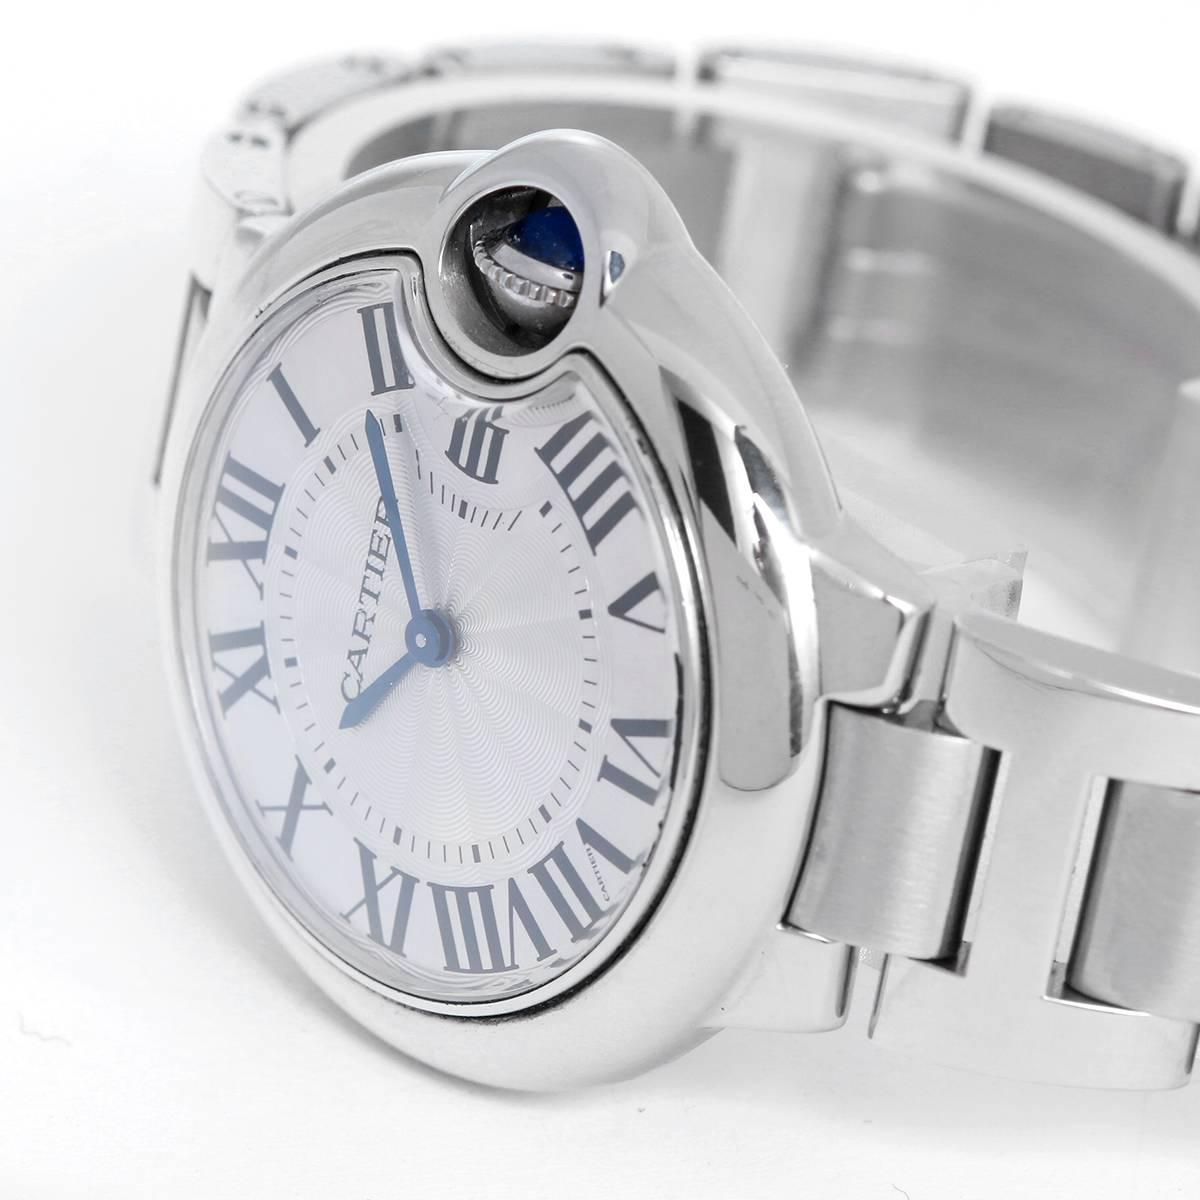 Cartier Ballon Bleu 36 mm Stainless Steel Watch W69011Z4 -  Quartz. Stainless Steel ( 36 mm ). Silver Guilloche dial with blue hands. Stainless Steel. Pre-owned with custom box.